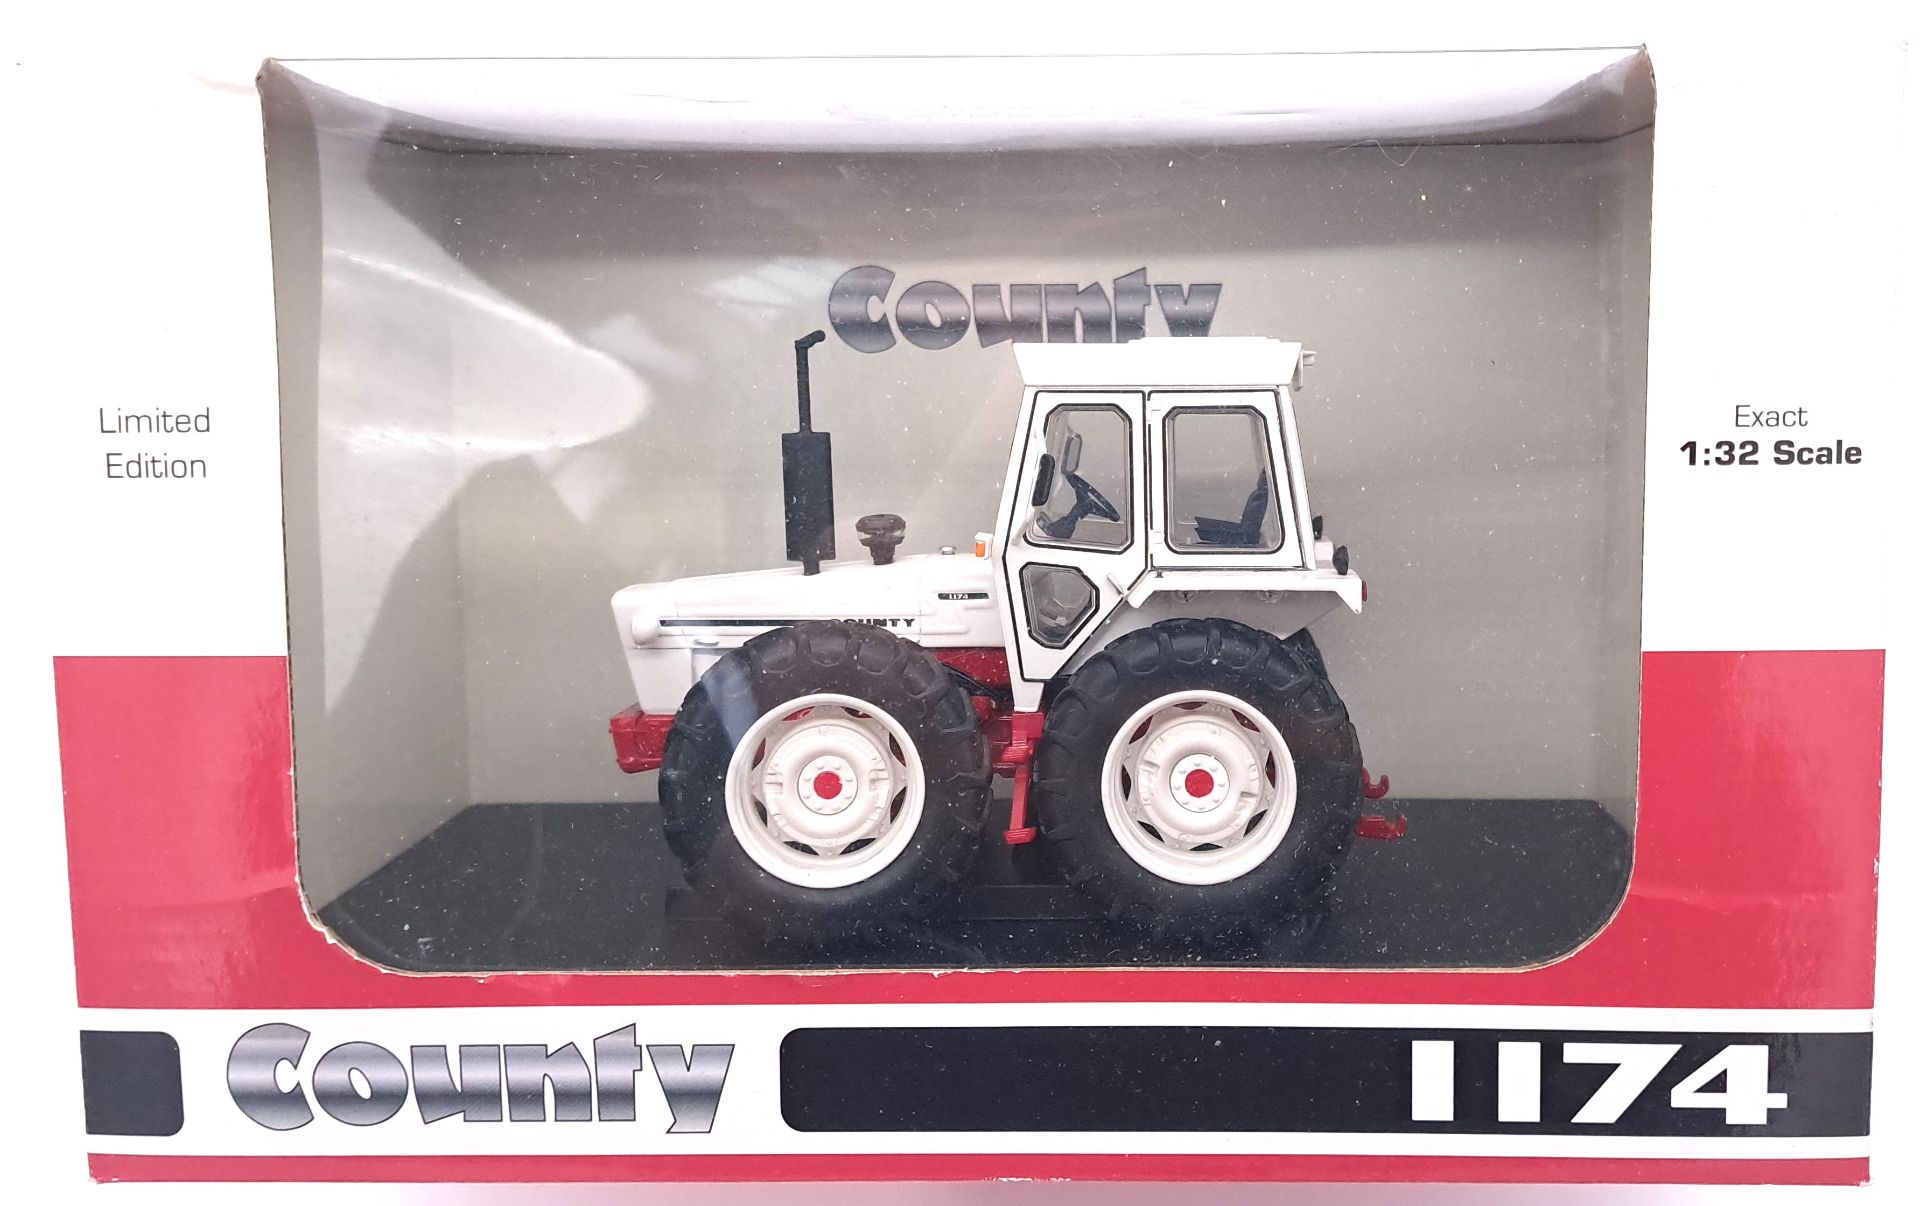 Universal Hobbies (County Series) boxed 1:32 scale Tractor group - Image 4 of 5